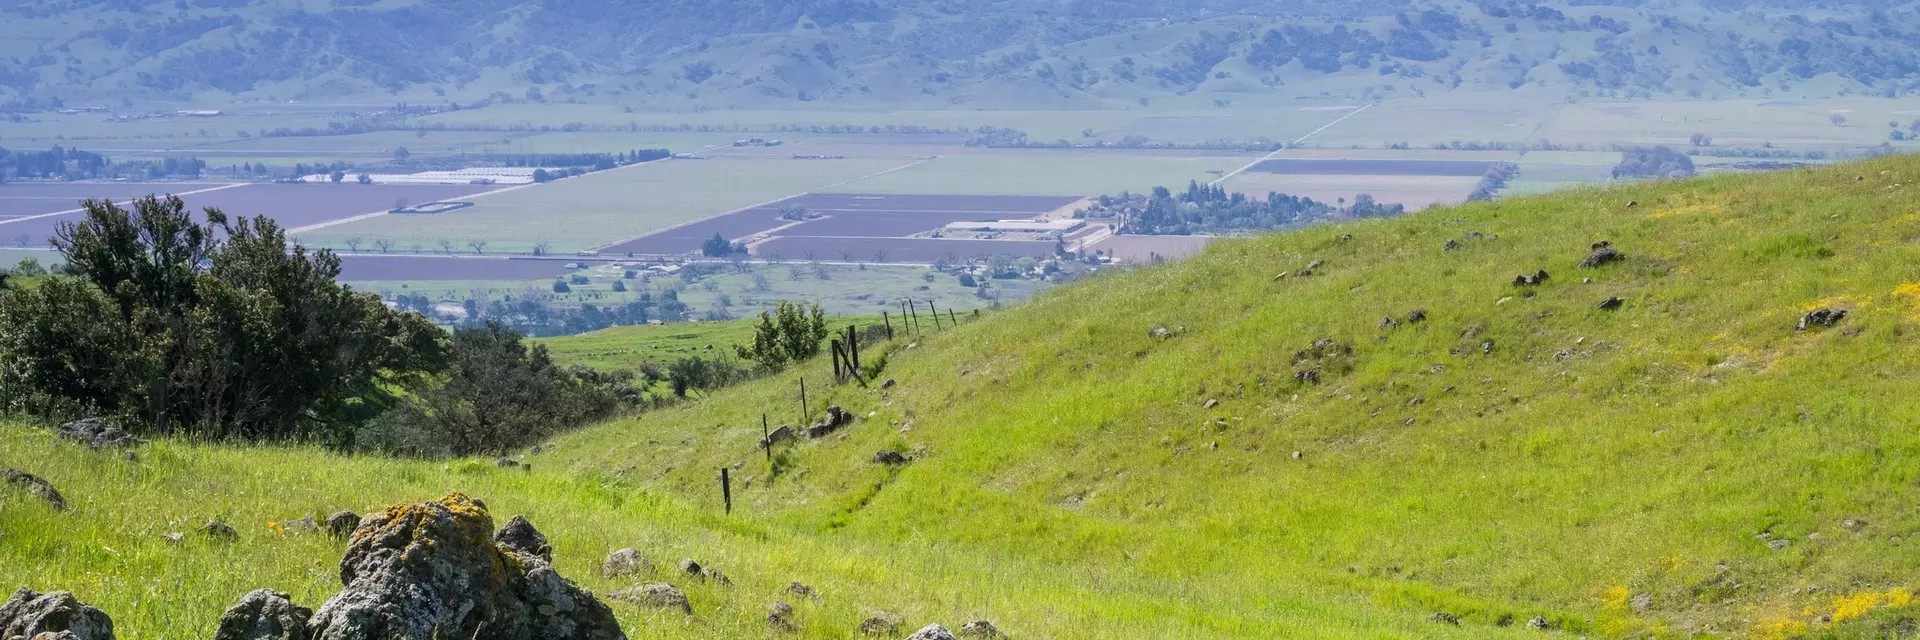 green hills in south coyote valley